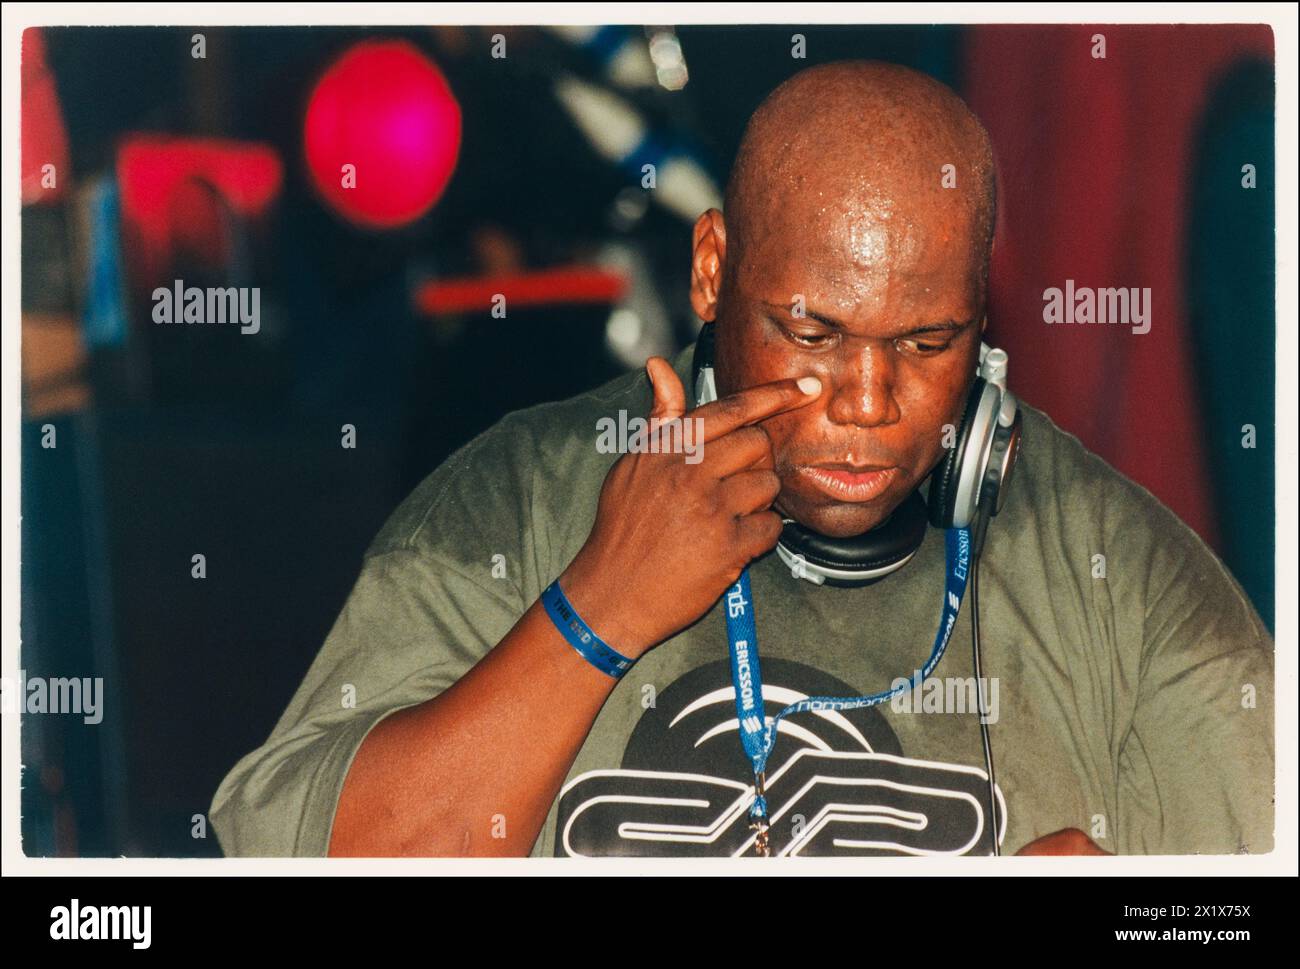 SUPERSTAR DJ, CARL COX, HOMELANDS FESTIVAL, 1999: Legendary DJ Carl Cox playing live in the deep house The End Tent at Homelands Festival 1999, in 'The Bowl', Matterley Estate near Winchester, England, UK on 29 May 1999. Photo: Rob Watkins. Stock Photo